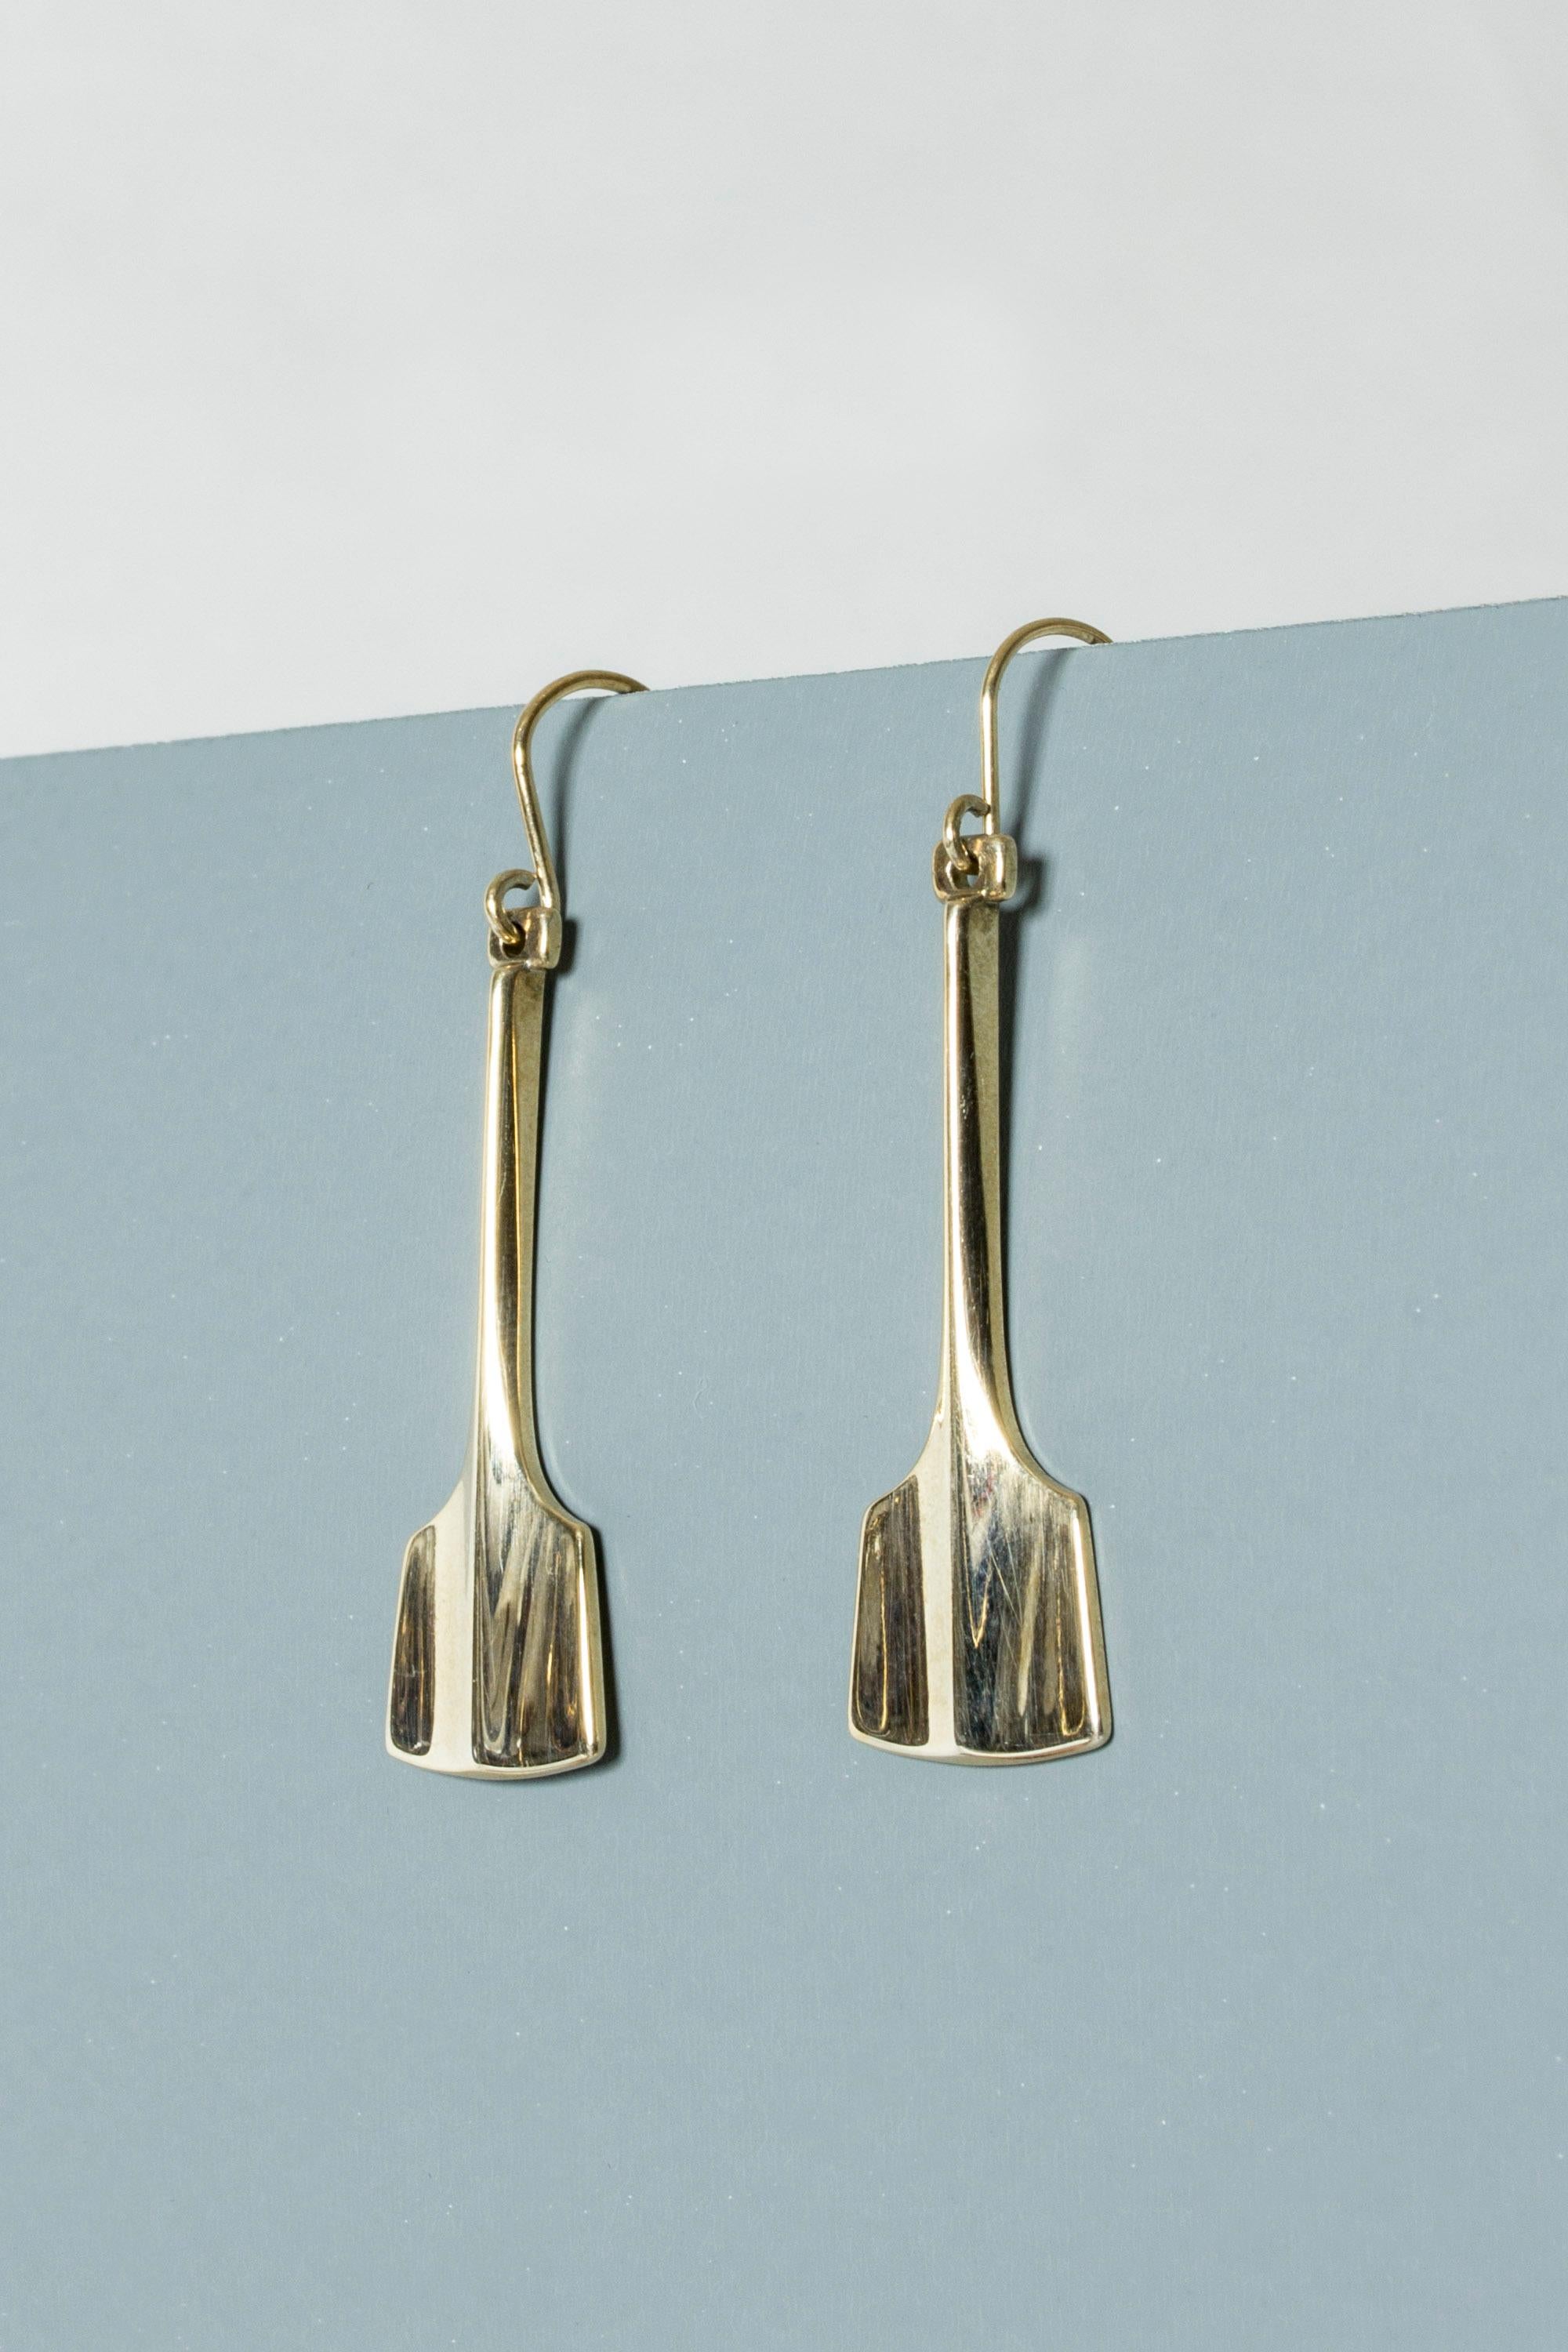 Pair of amazing gilded silver earrings by Bjørn Sigurd Østern. Sleek modernist design with with a sophisticated ridge running along the length of the earrings.
